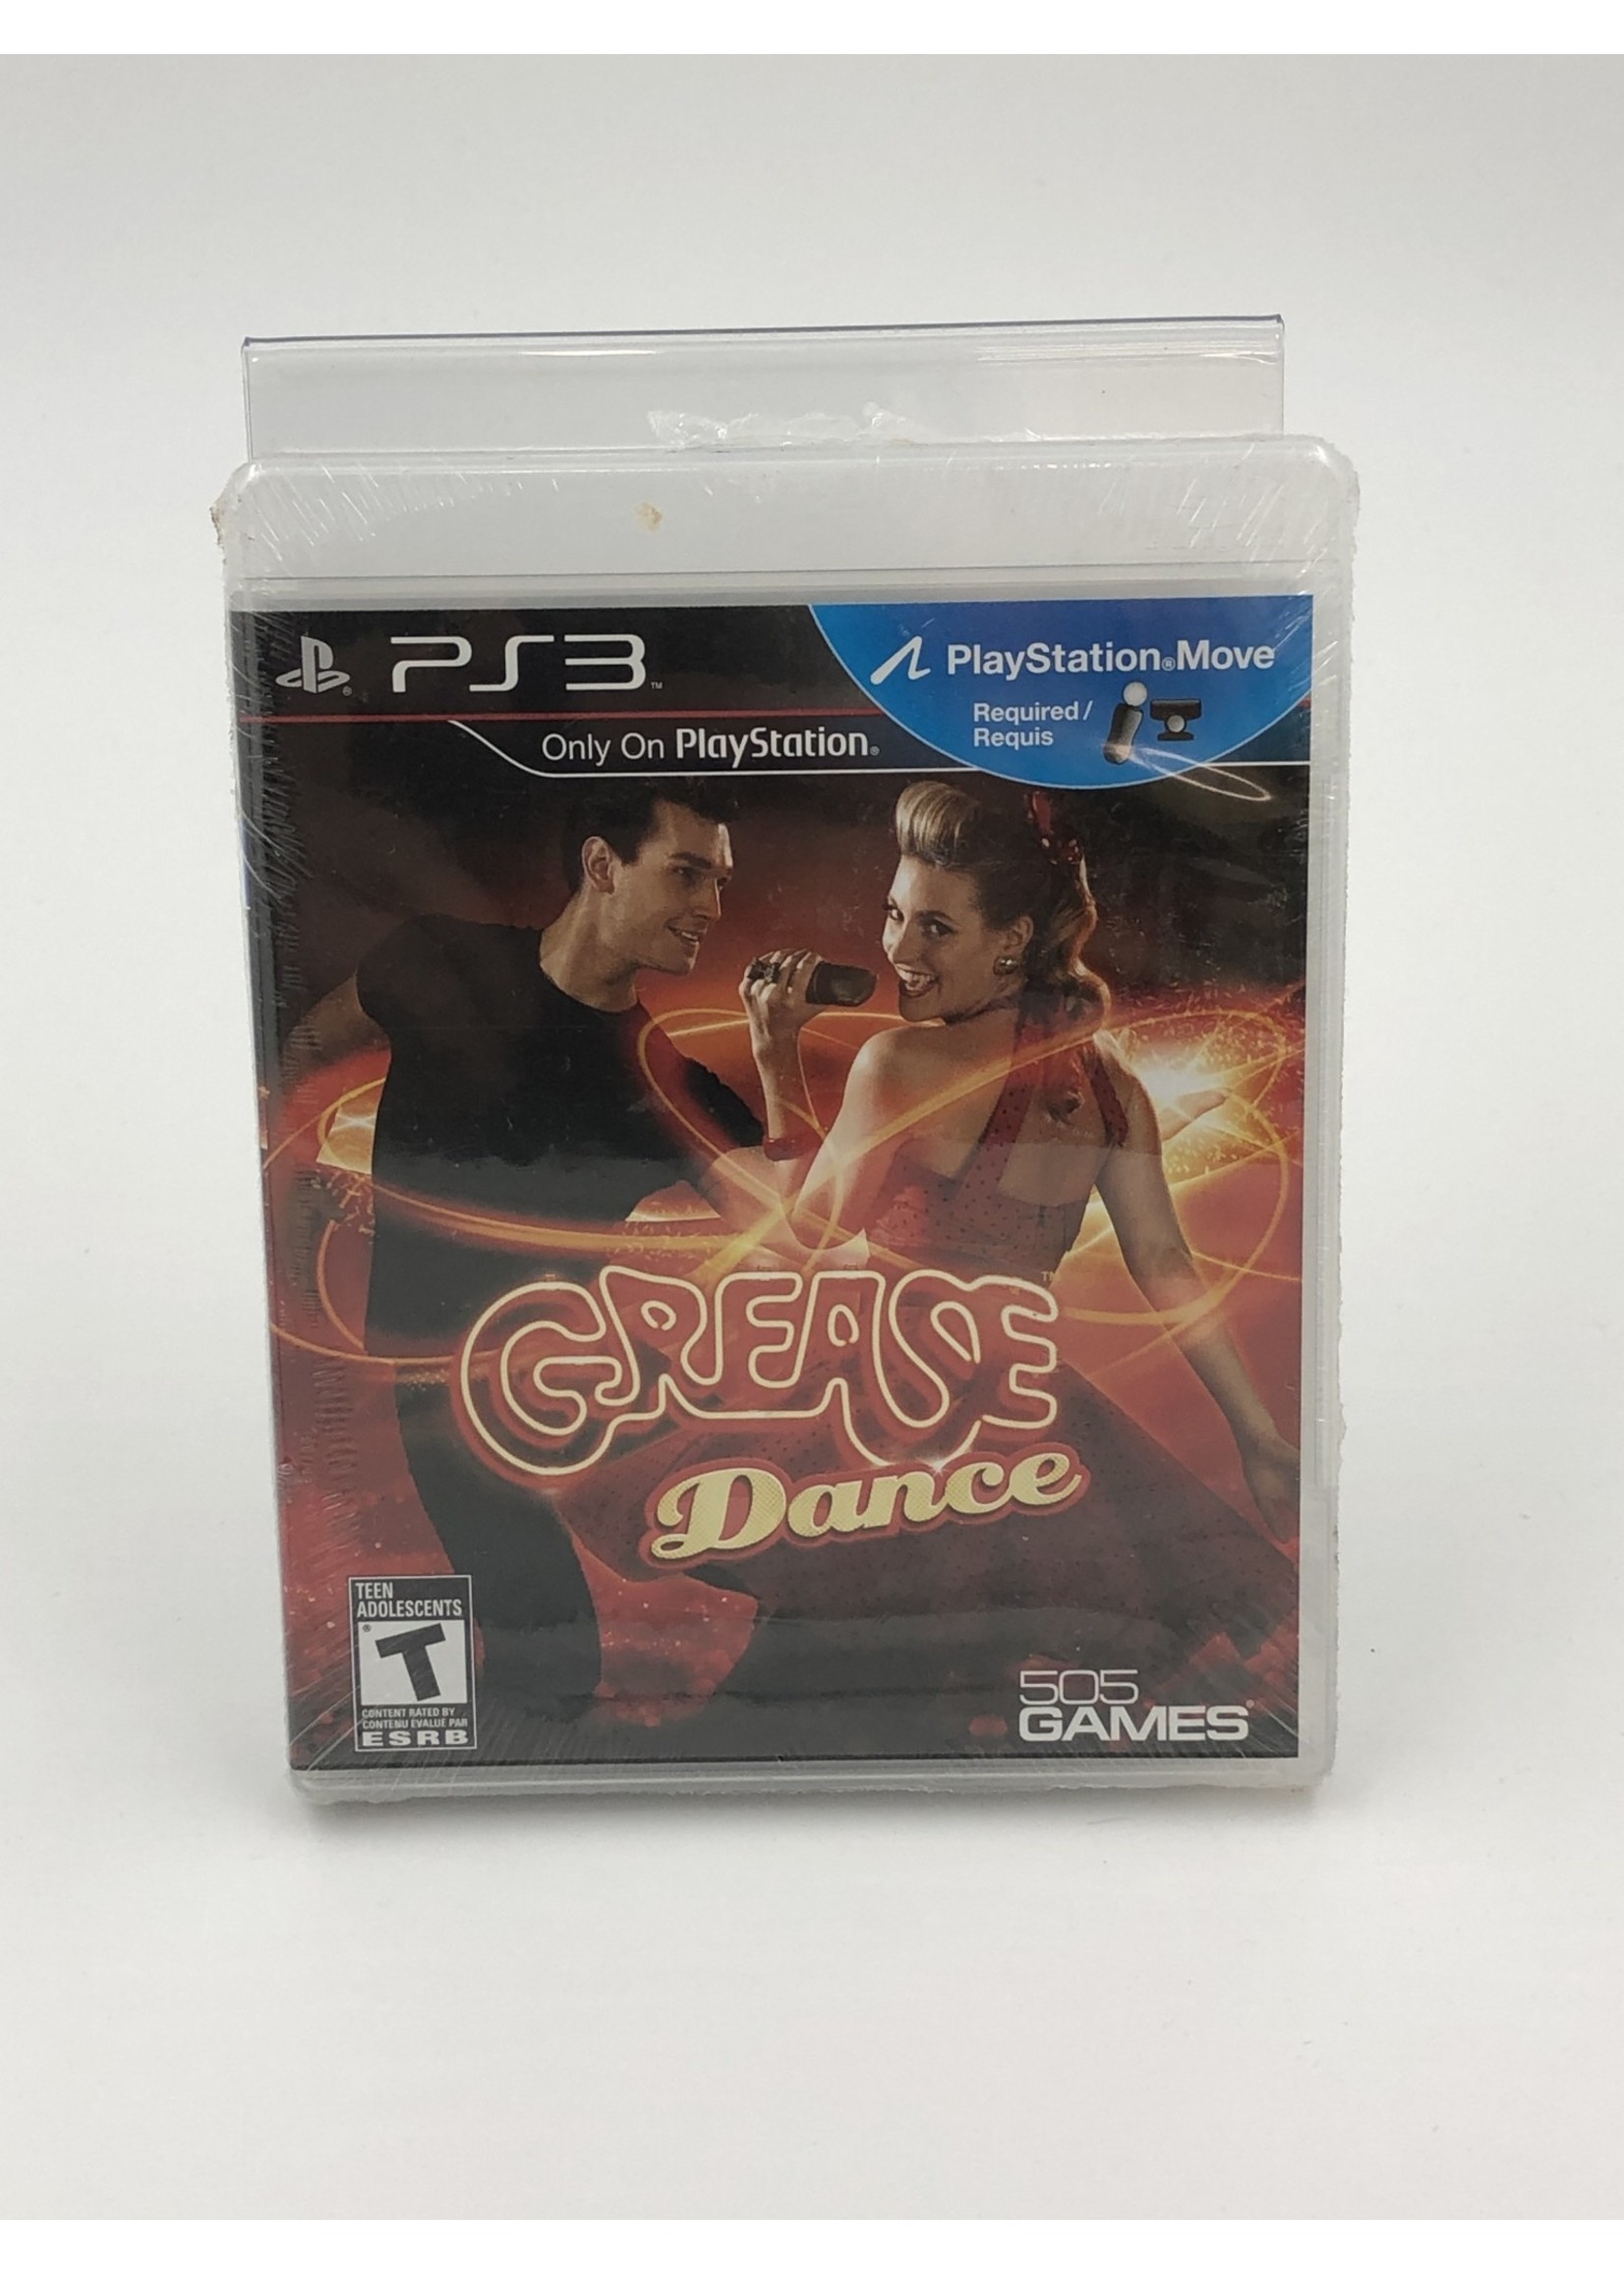 Sony   Grease Dance - PS3